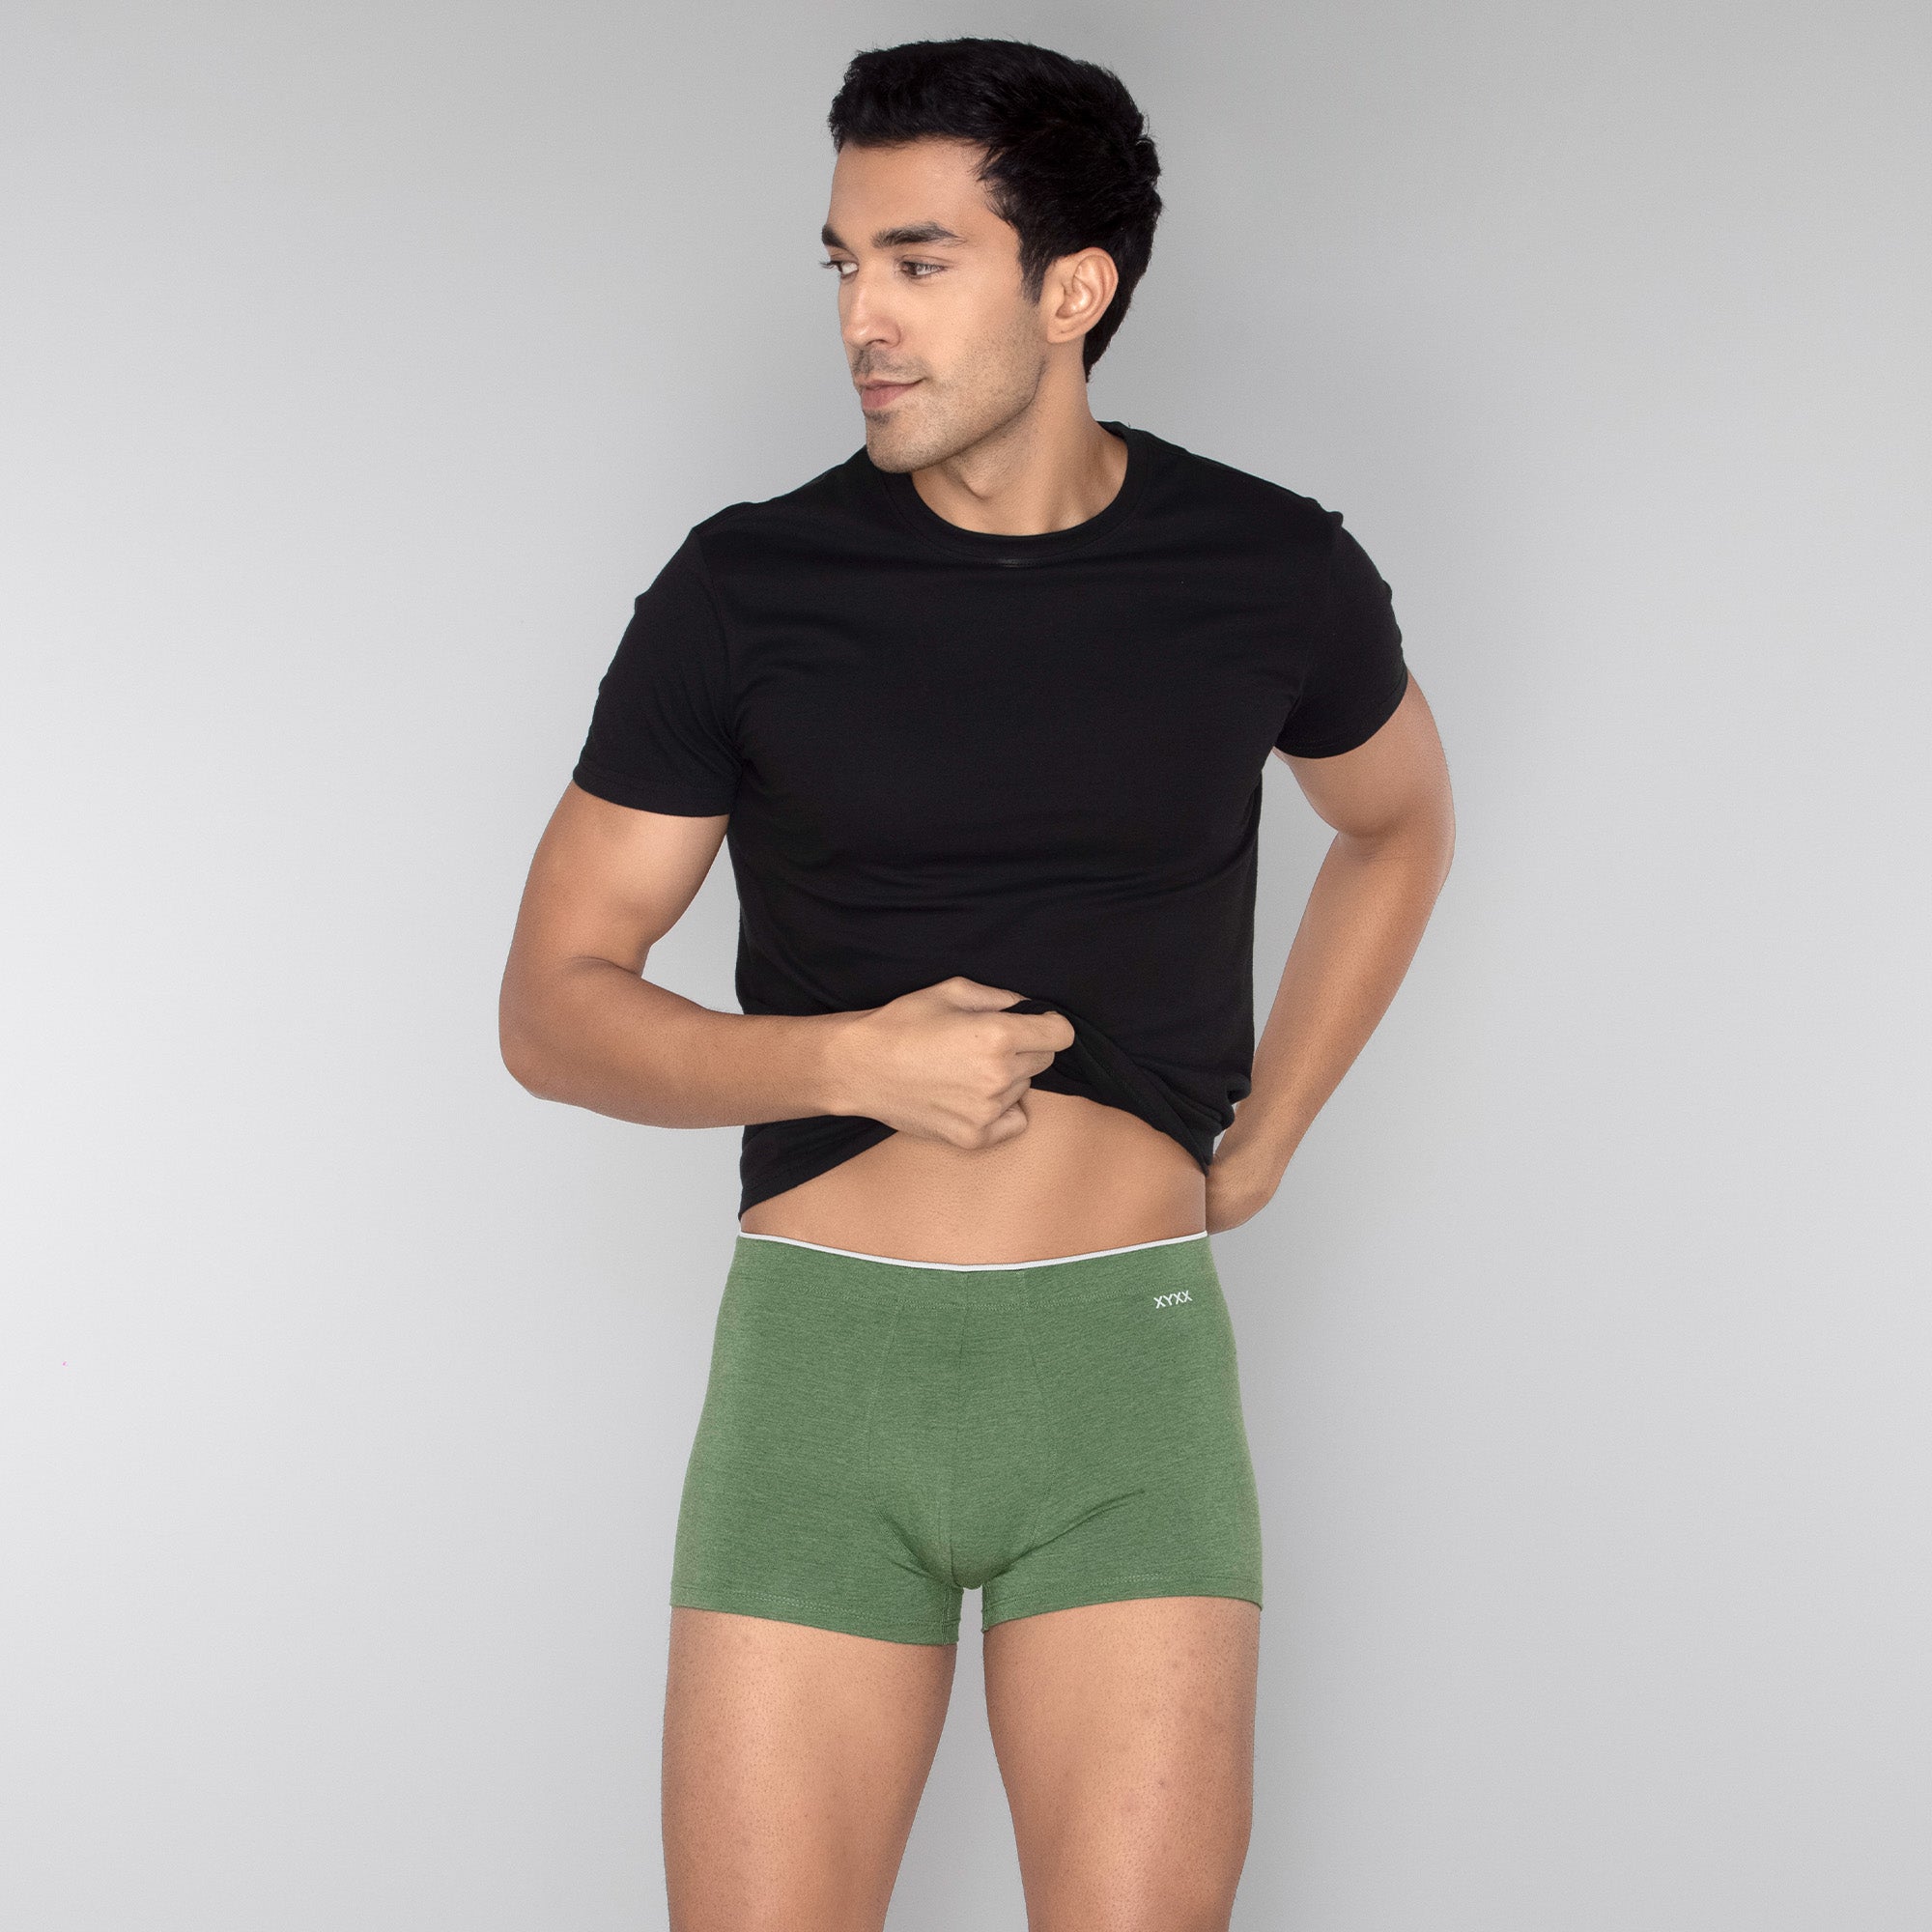 Uno Medley Modal Trunks For Men Olive Green -  XYXX Mens Apparels